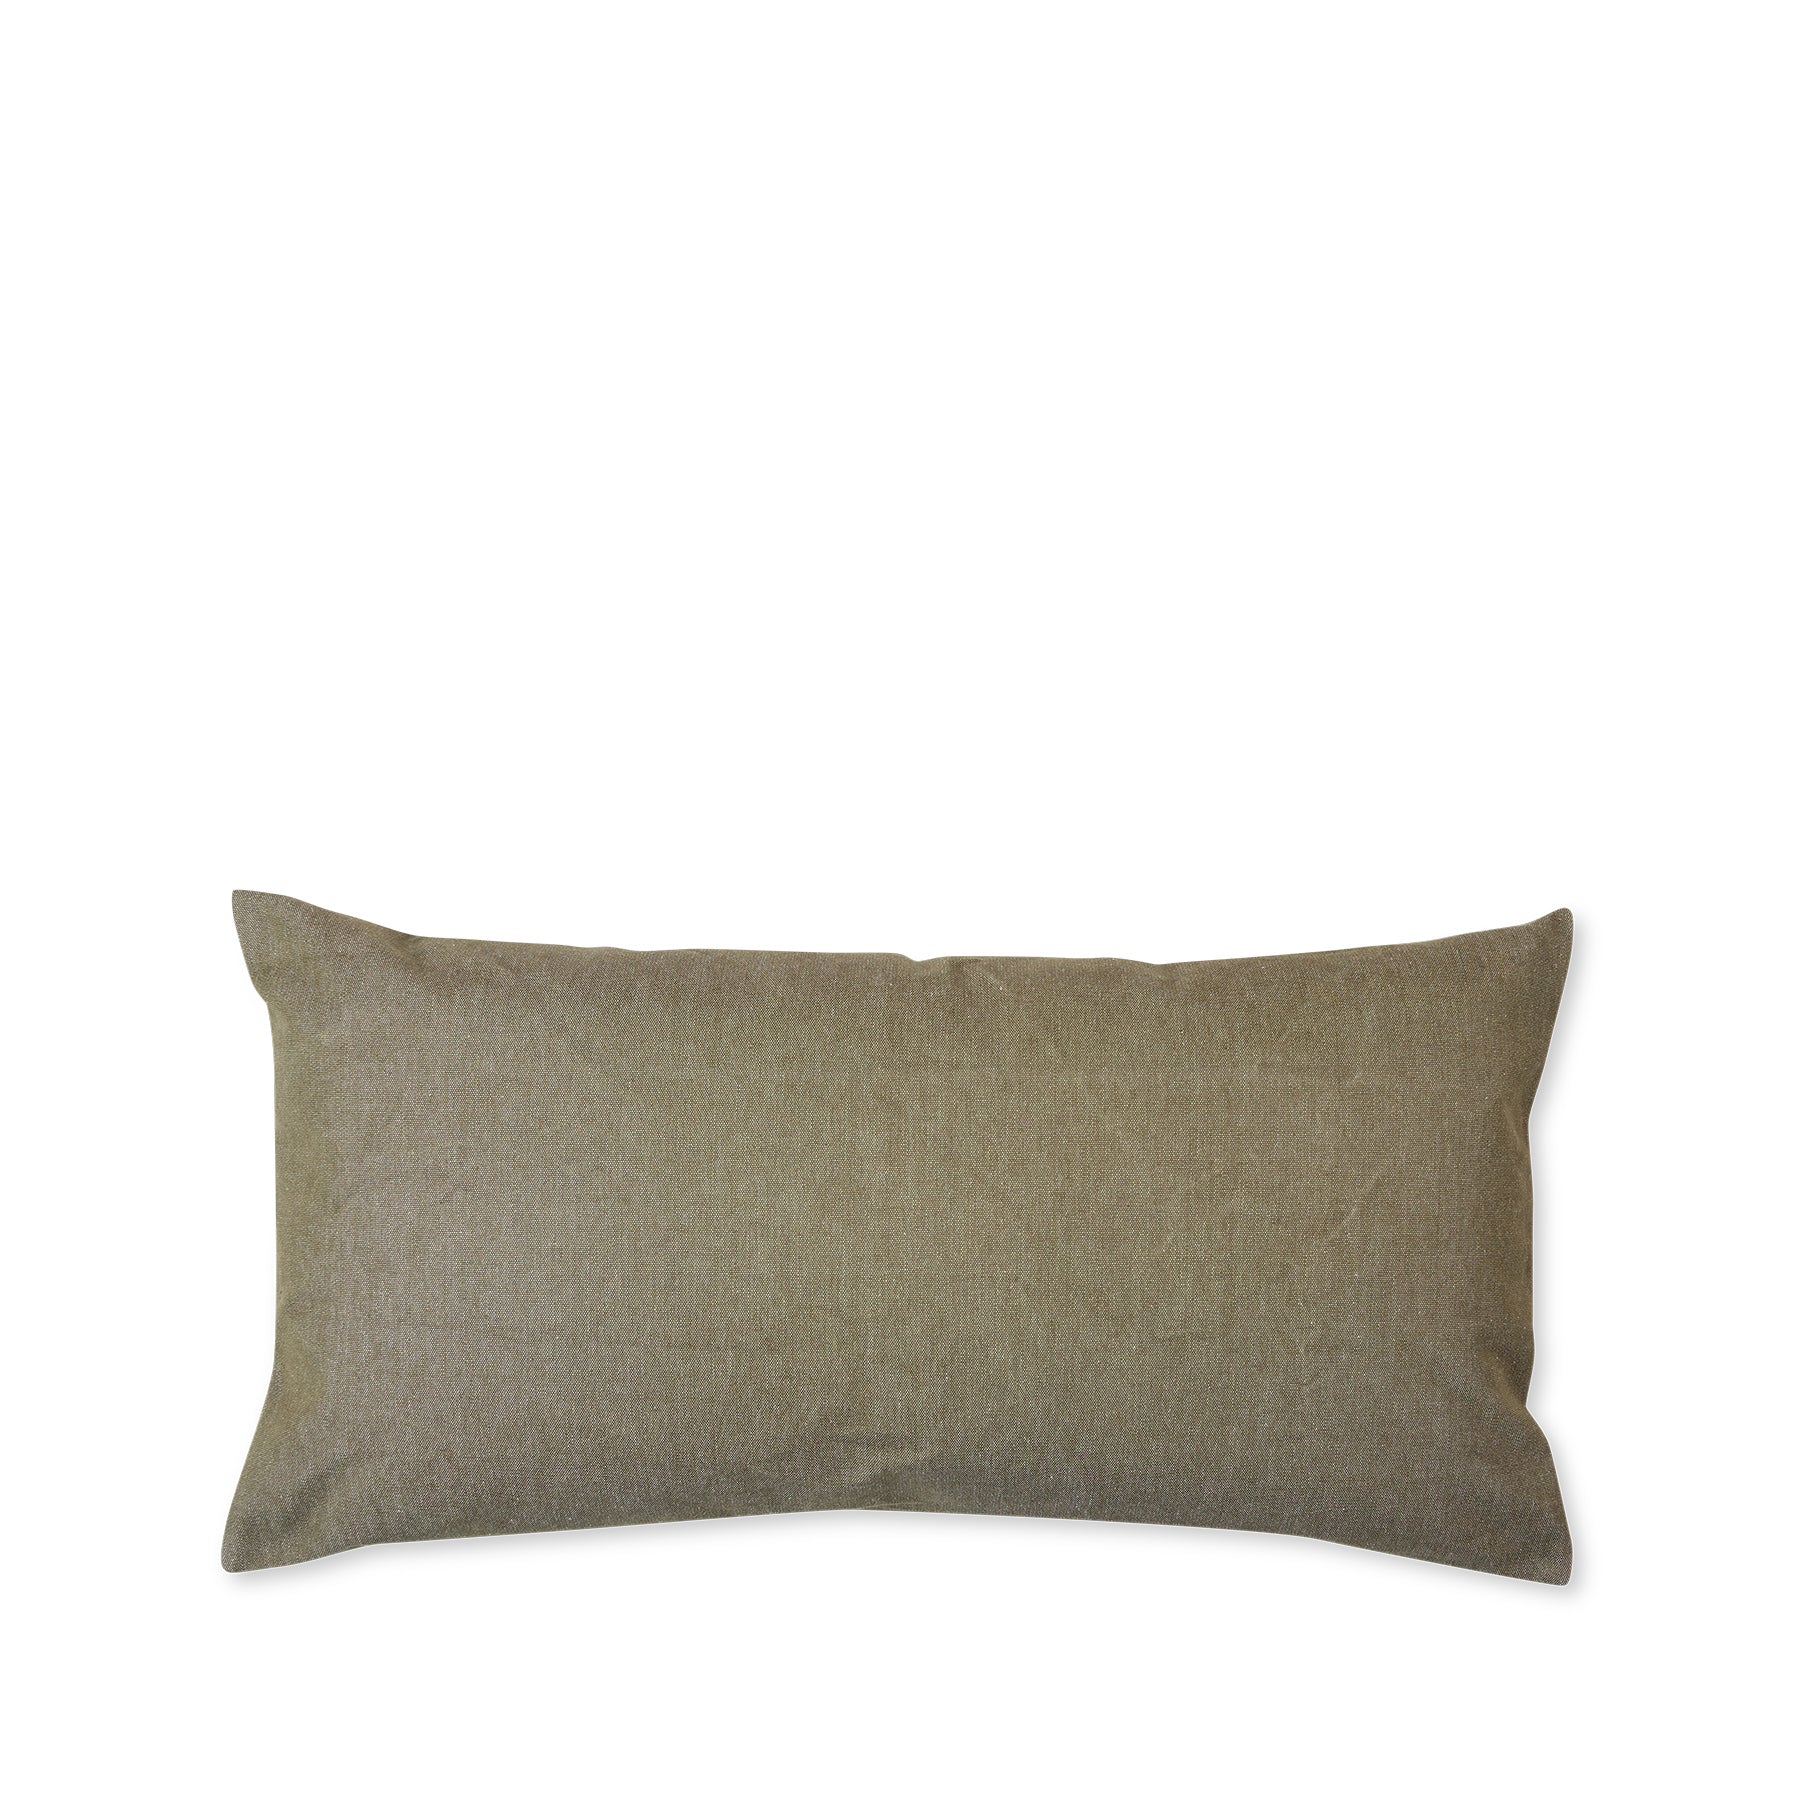 Sturdy Boy Bolster in Olive Zoom Image 1